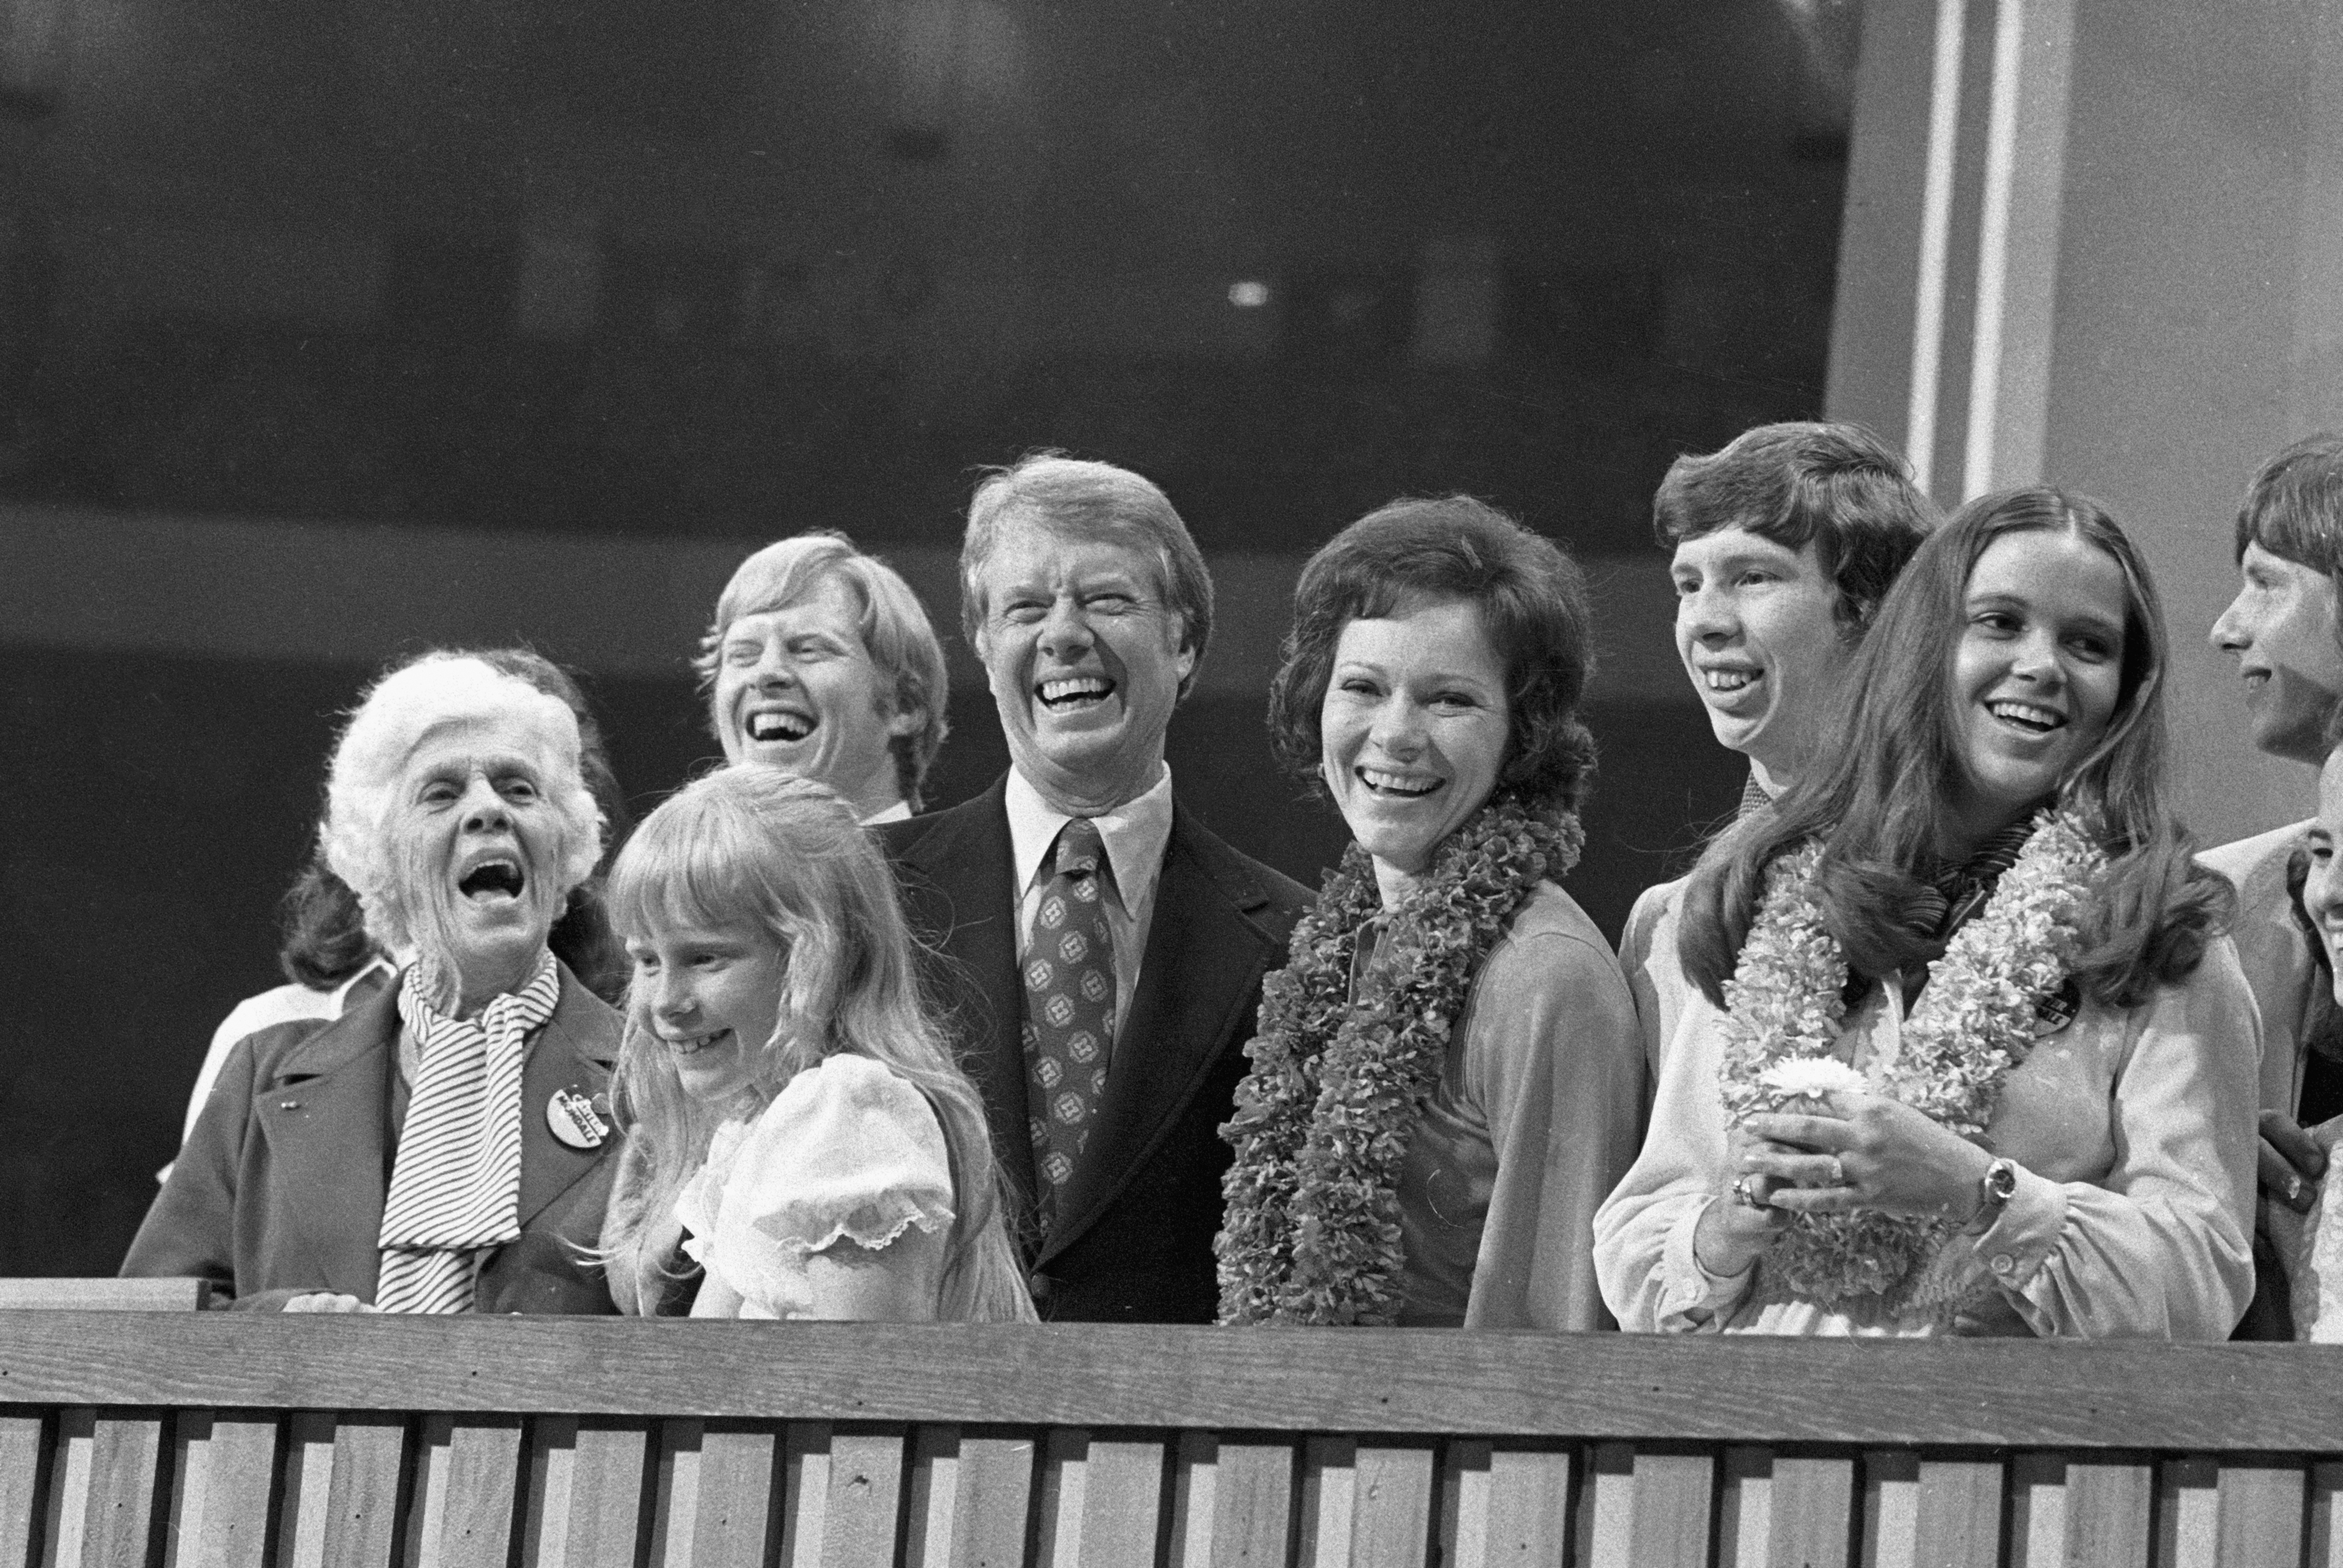 Lillian, Amy, Jack, Jimmy, Rosalynn, Jeff, Annette, Chip, and Caron Carter on the podium after Jimmy gave his acceptance speech on July 15, 1976 | Source: Getty Images